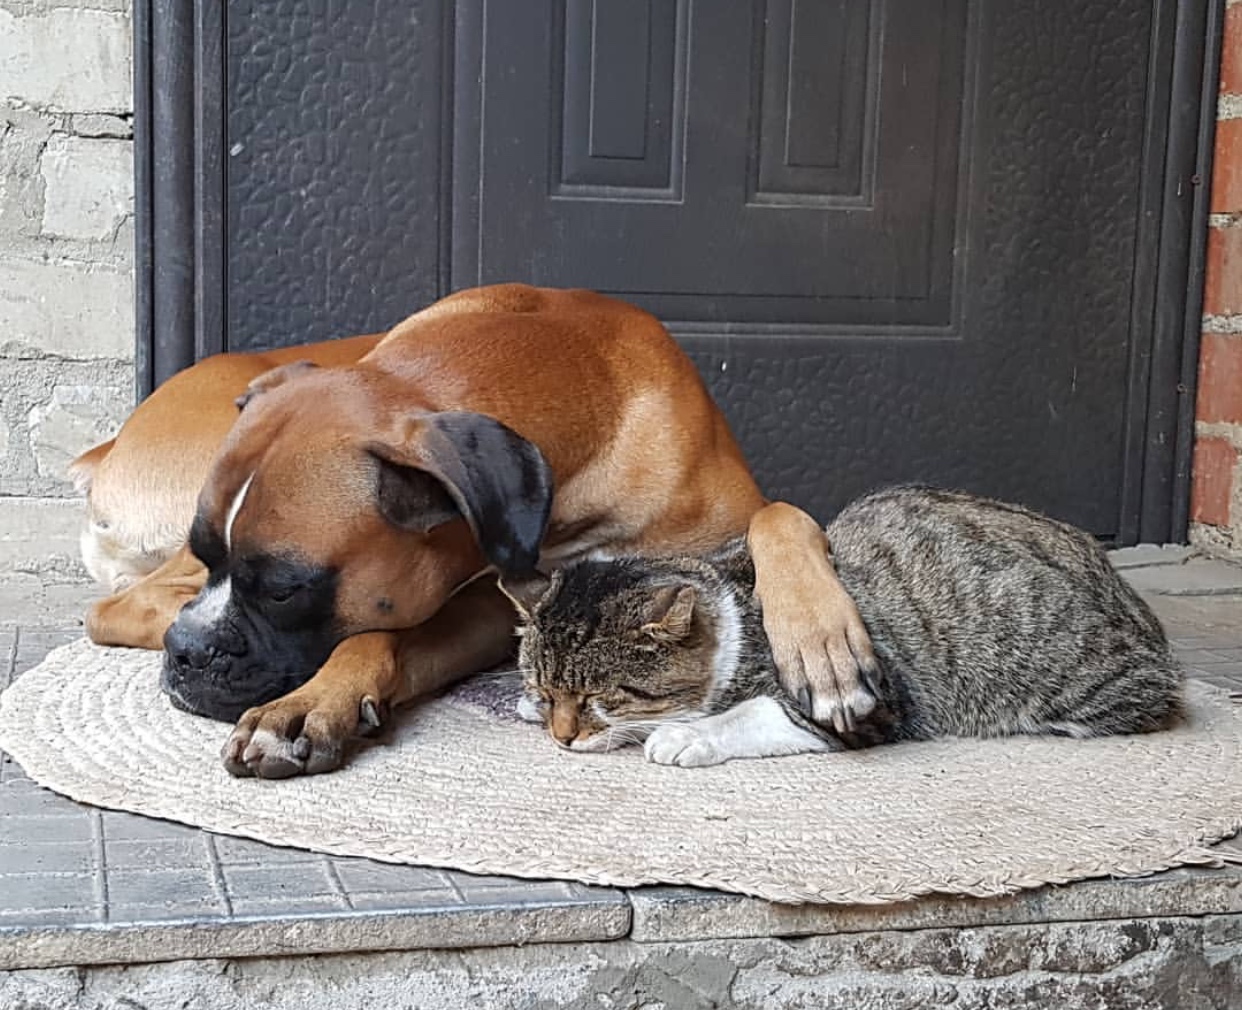 A Boxer dog sleeping in the carpet with its paws on the back of the cat sleeping beside him